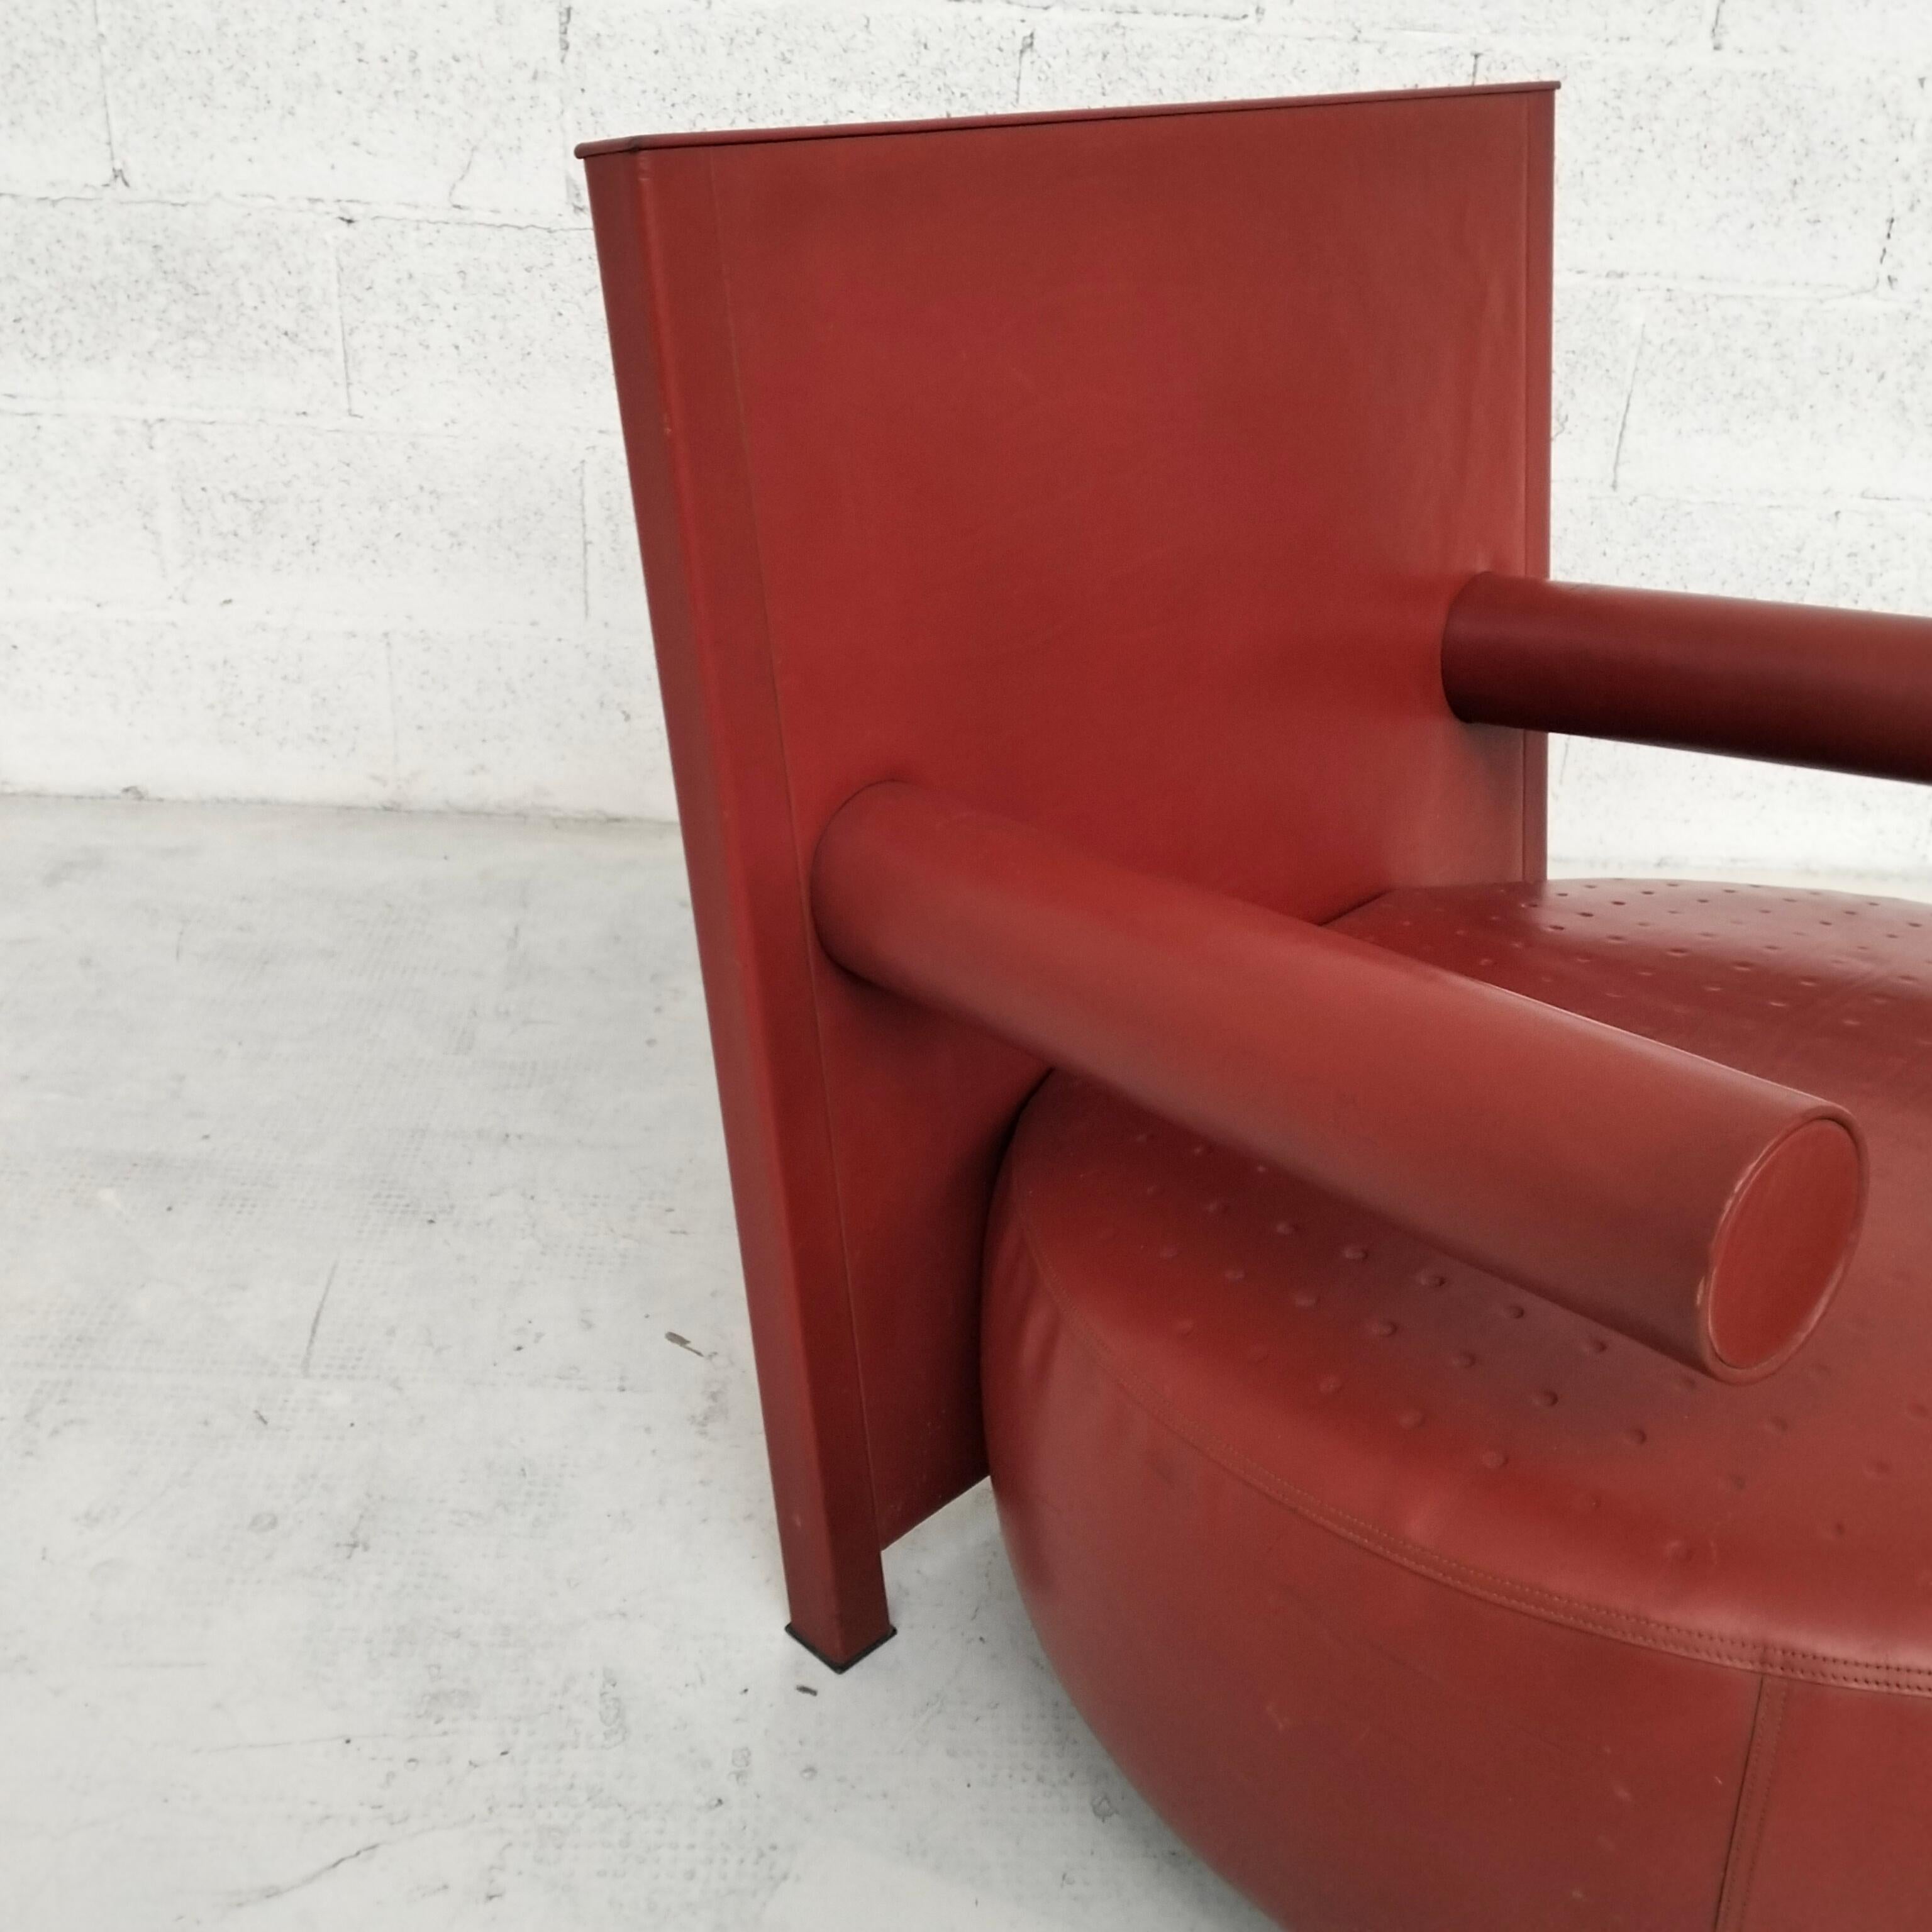 Baisity leather armchair by Antonio Citterio for B&B Italia - 1980’s For Sale 2